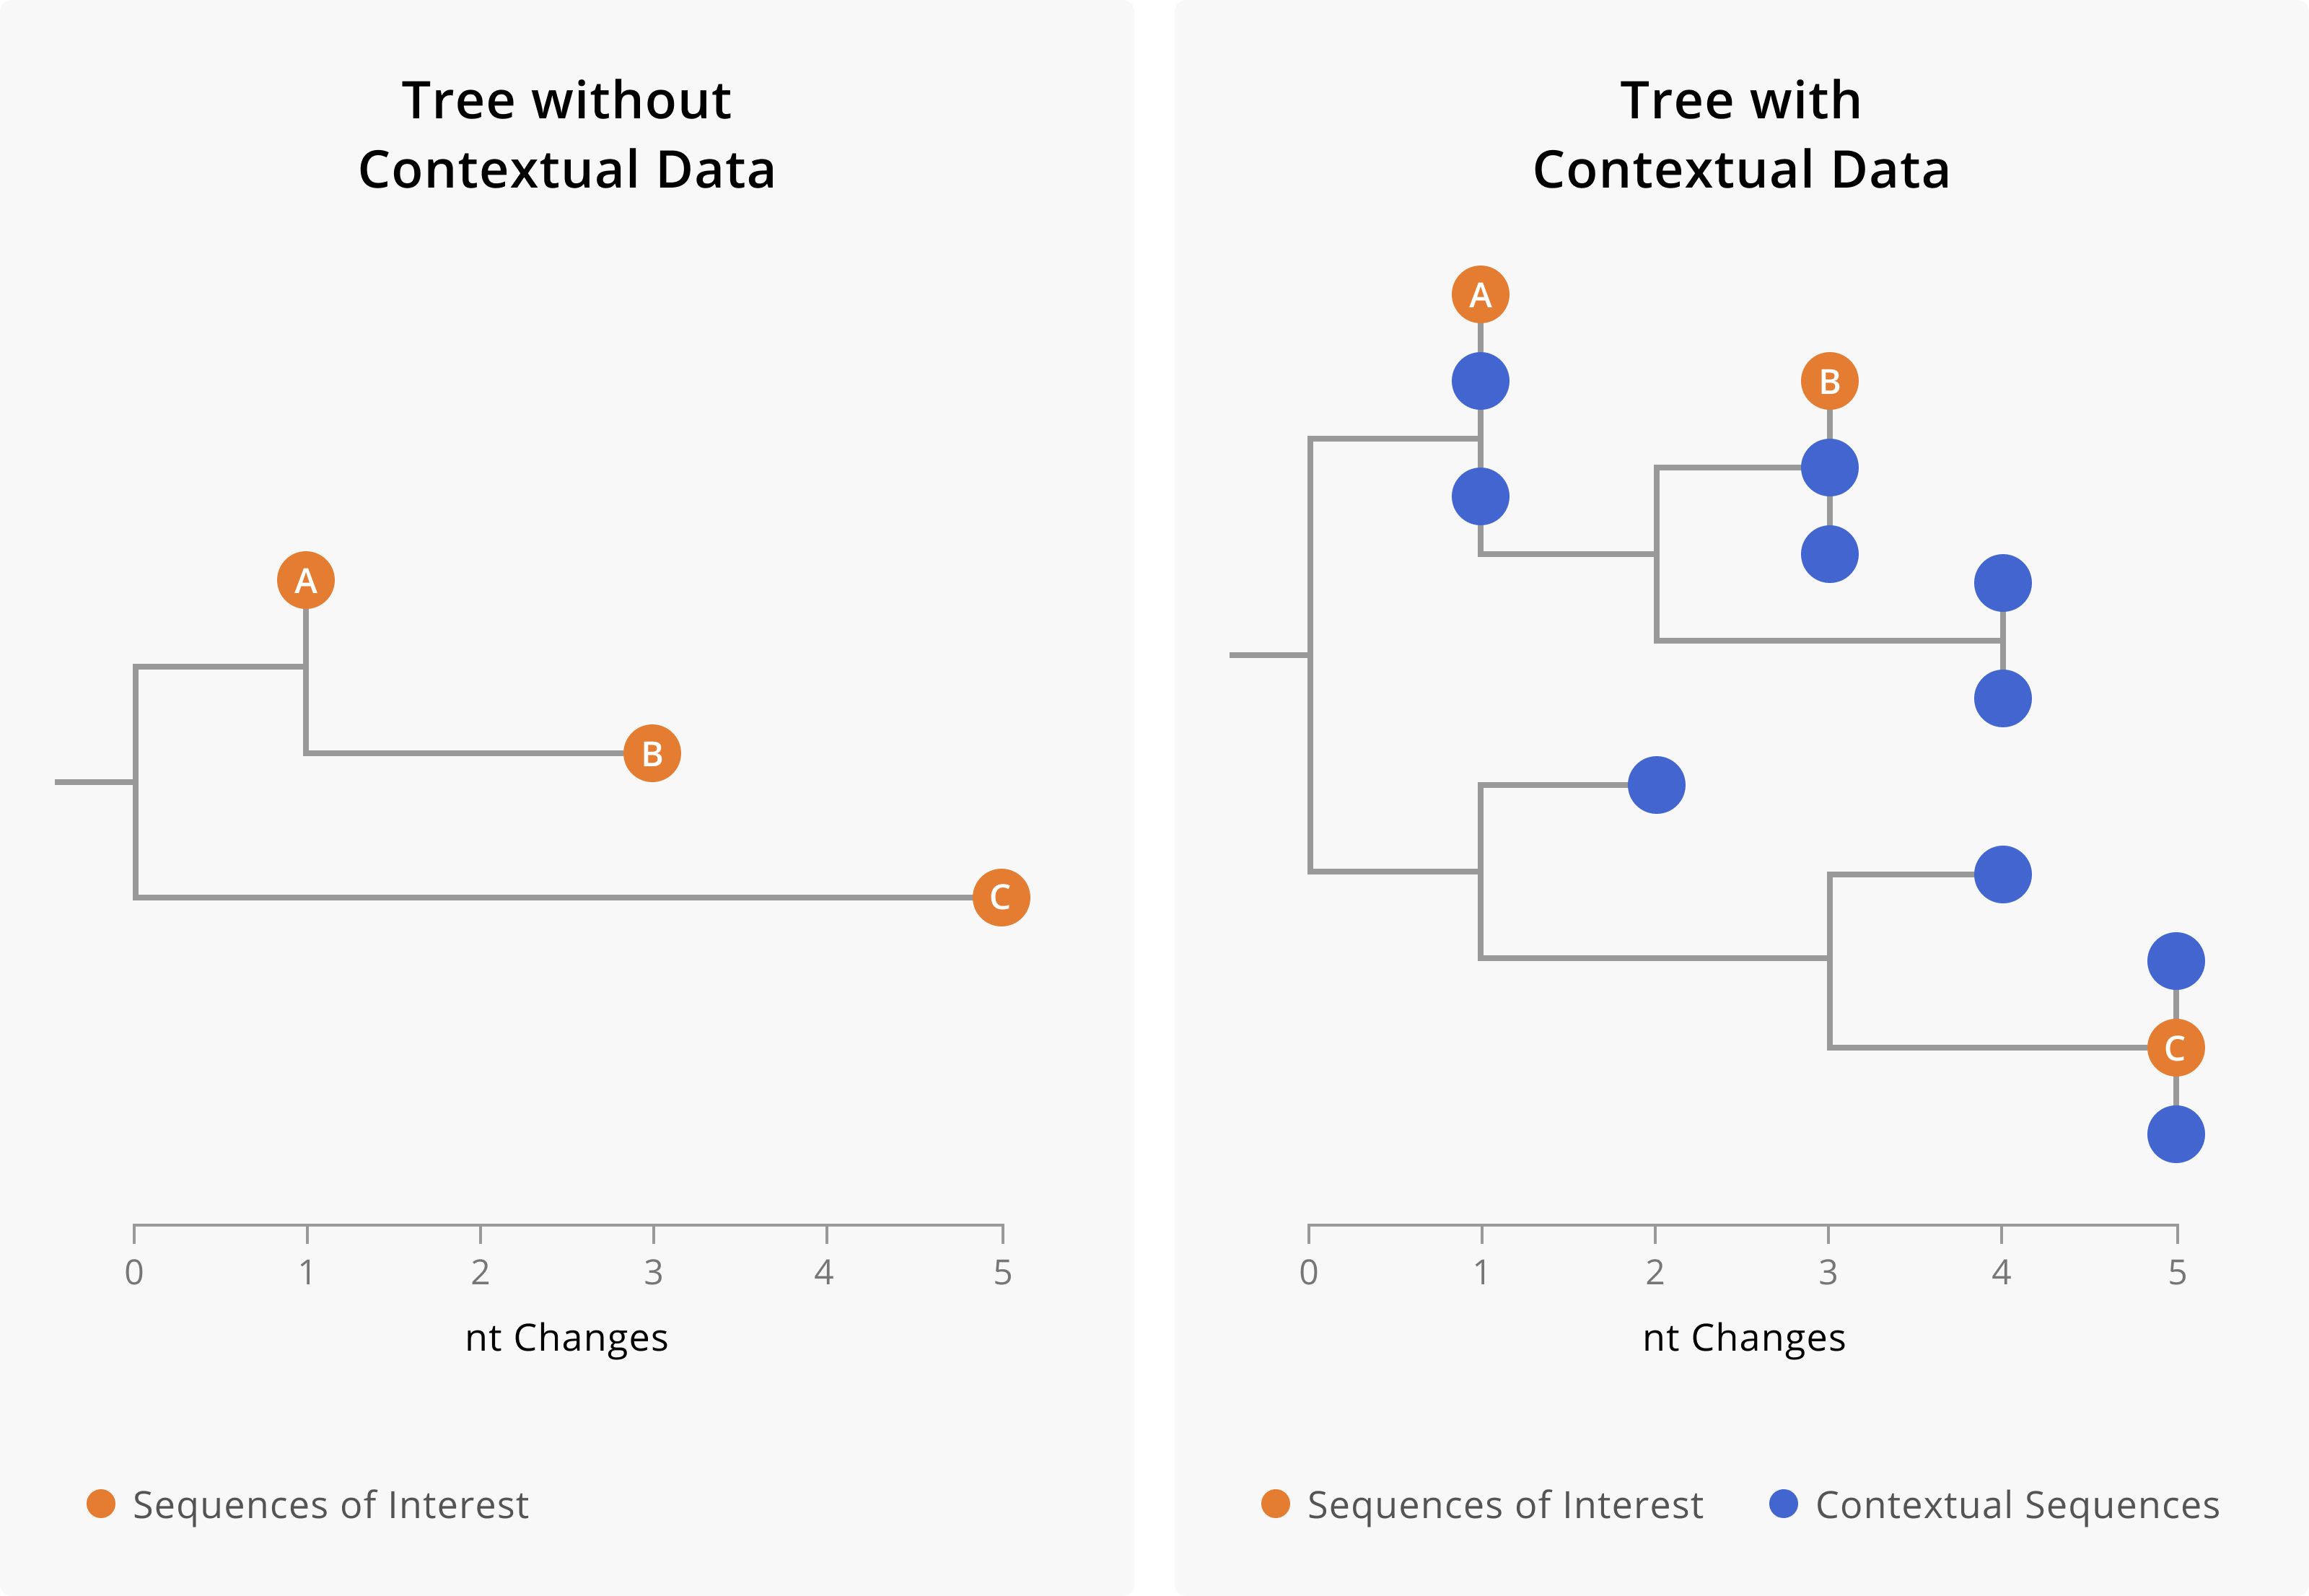 A toy example showing the importance of including contextual data when assessing linkage between cases. On the left-hand side is a phylogenetic tree including only three samples of interest. On the right-hand side, we show a phylogenetic tree of the same three samples of interest (orange tips) along with closely-related contextual data (blue tips). The addition of contextual data clarifies the relationships between the samples of interest. In the tree on the left, we might assume that A and B are related cases, since they both share a mutation and are only two nucleotides diverged from each other. However, the addition of contextual data (blue) provides a more nuanced picture. We see that samples of interest A and B are in fact more closely related to contextual sequences than they are to each other. This could mean that A and B are not directly epidemiologically-linked, or it might mean that A and B are both part of a larger transmission chain captured by the contextual sequences. Furthermore, contextual data can make it more clear when samples are diverged. While we can see substantial genetic divergence between sample C and samples A and B in the tree on the left, the addition of contextual data makes it more clear that C is unrelated to samples A and B.